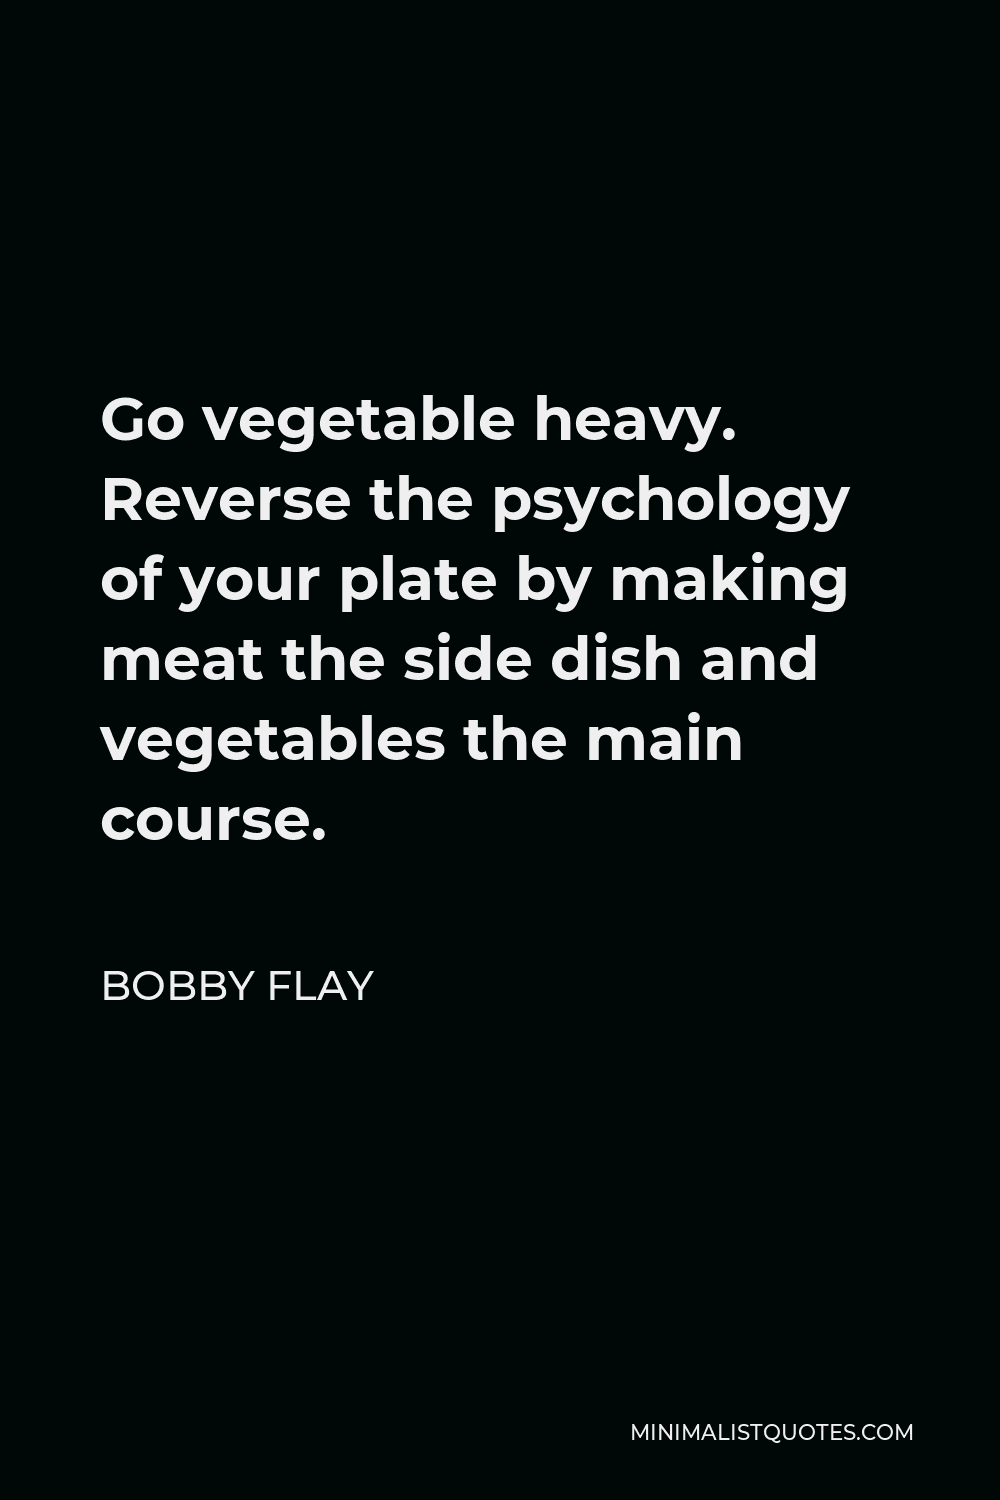 Bobby Flay Quote - Go vegetable heavy. Reverse the psychology of your plate by making meat the side dish and vegetables the main course.